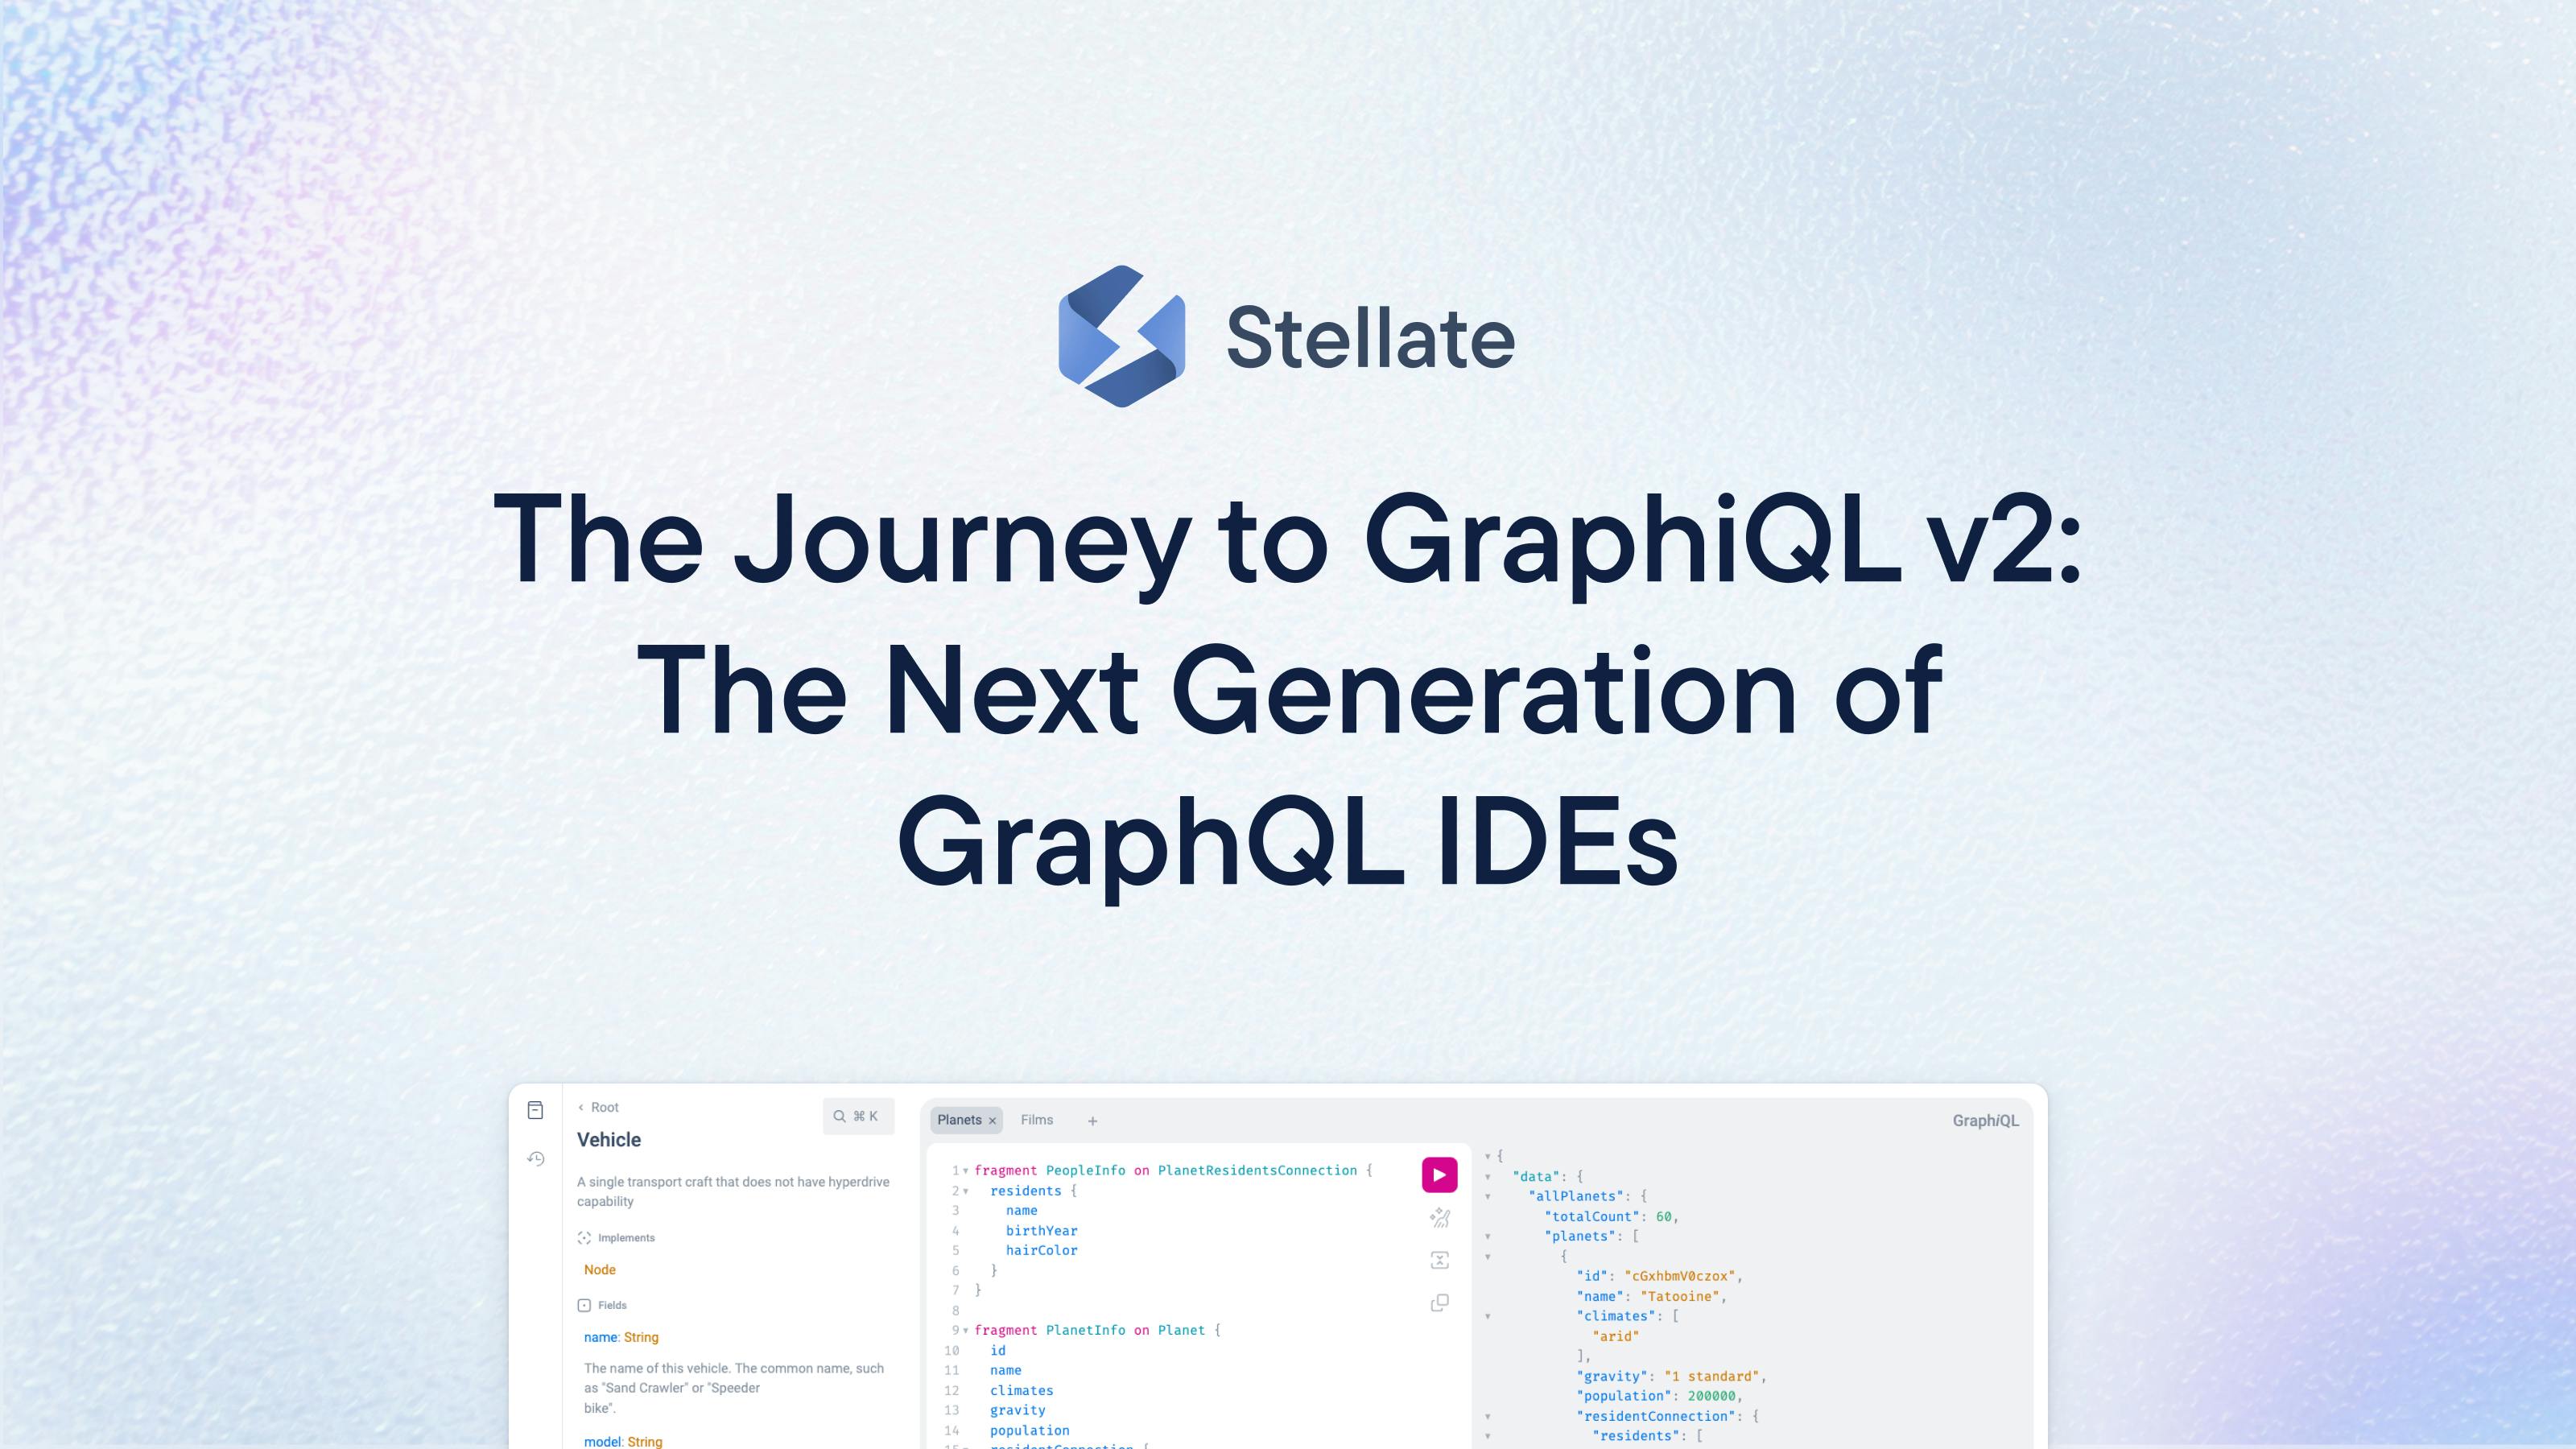 The Journey to GraphiQL v2: The Next Generation of GraphQL IDEs